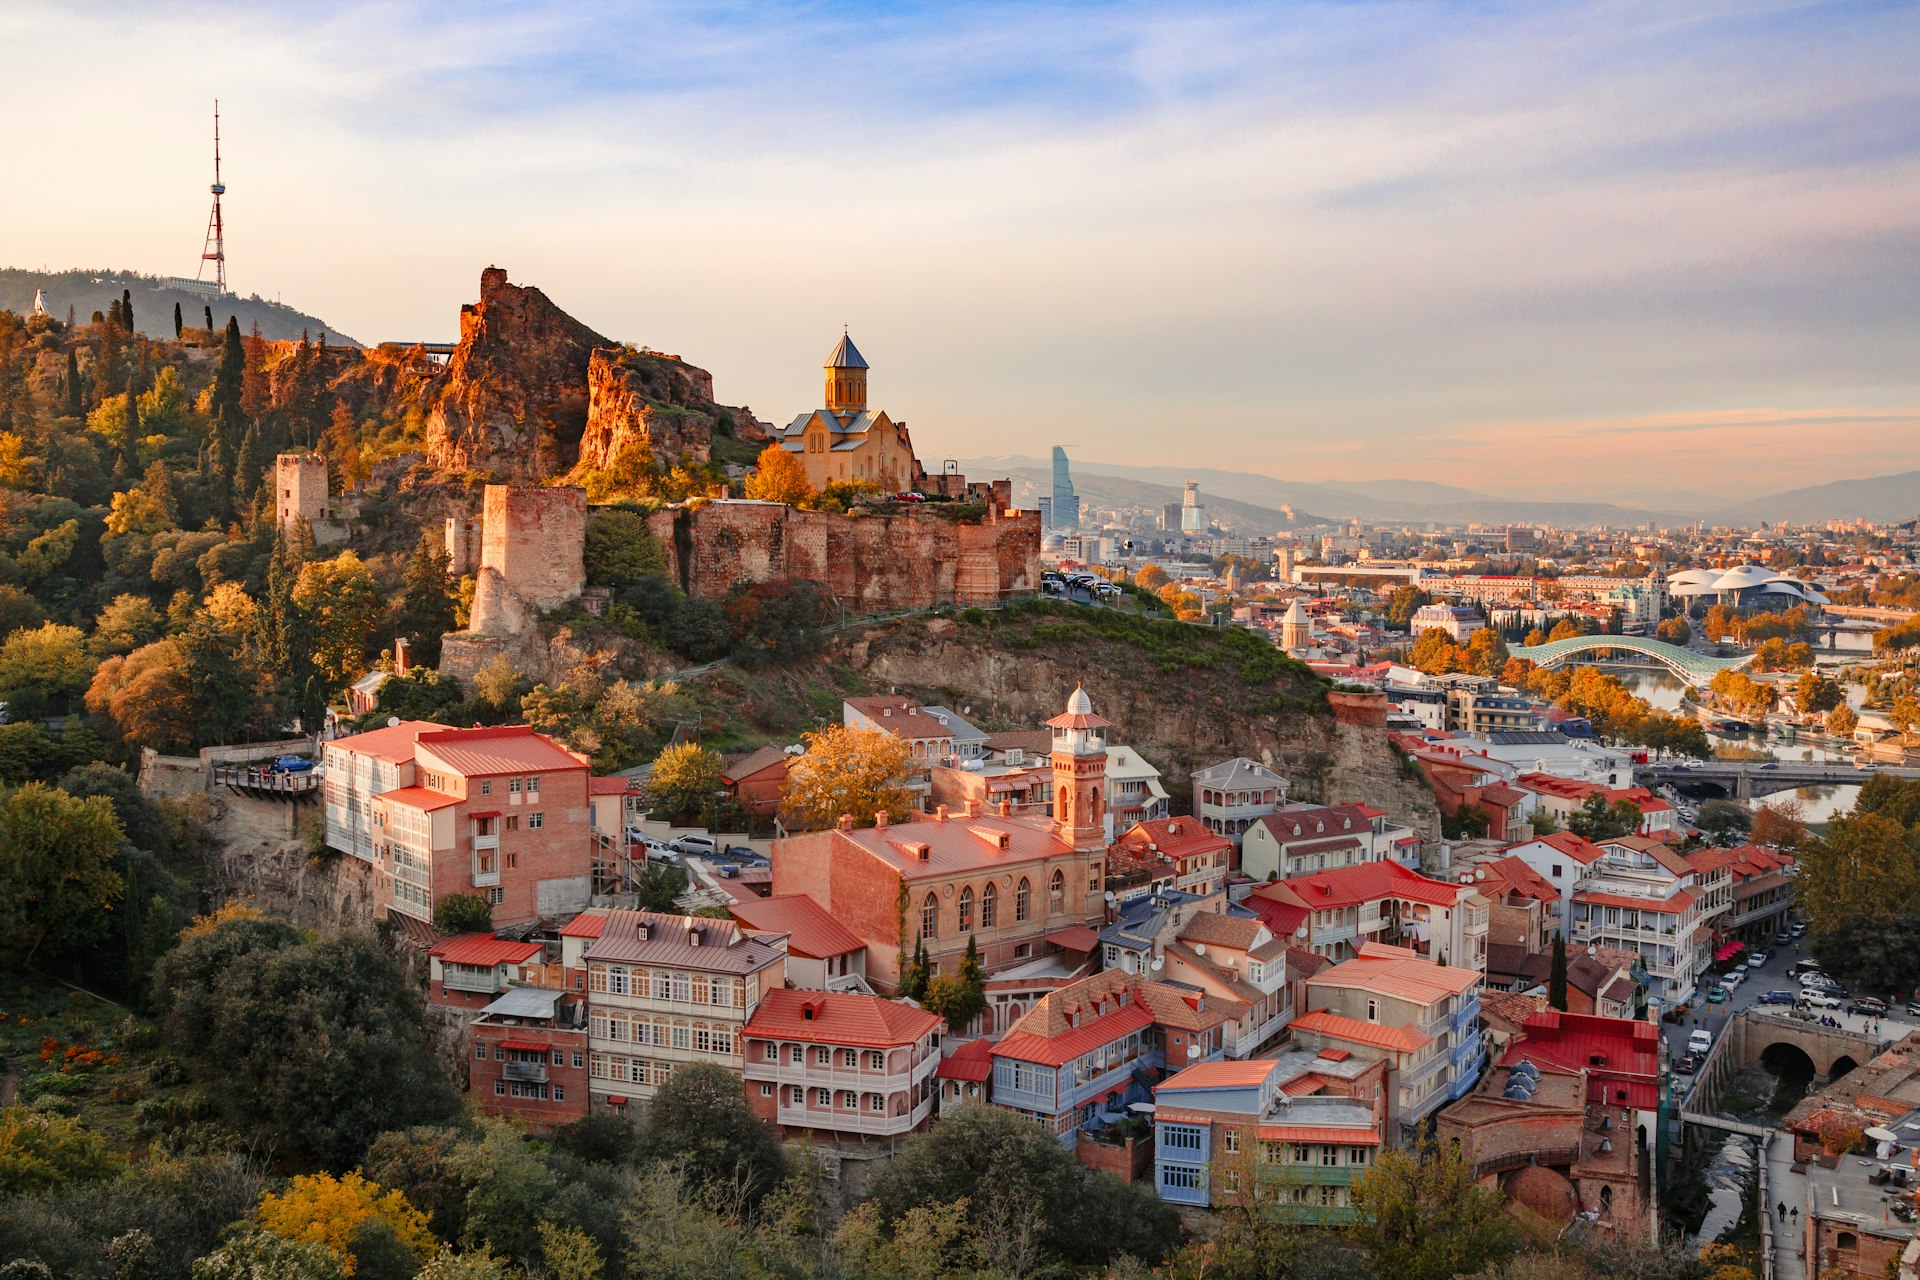 Sunset view of Old Tbilisi from the hill